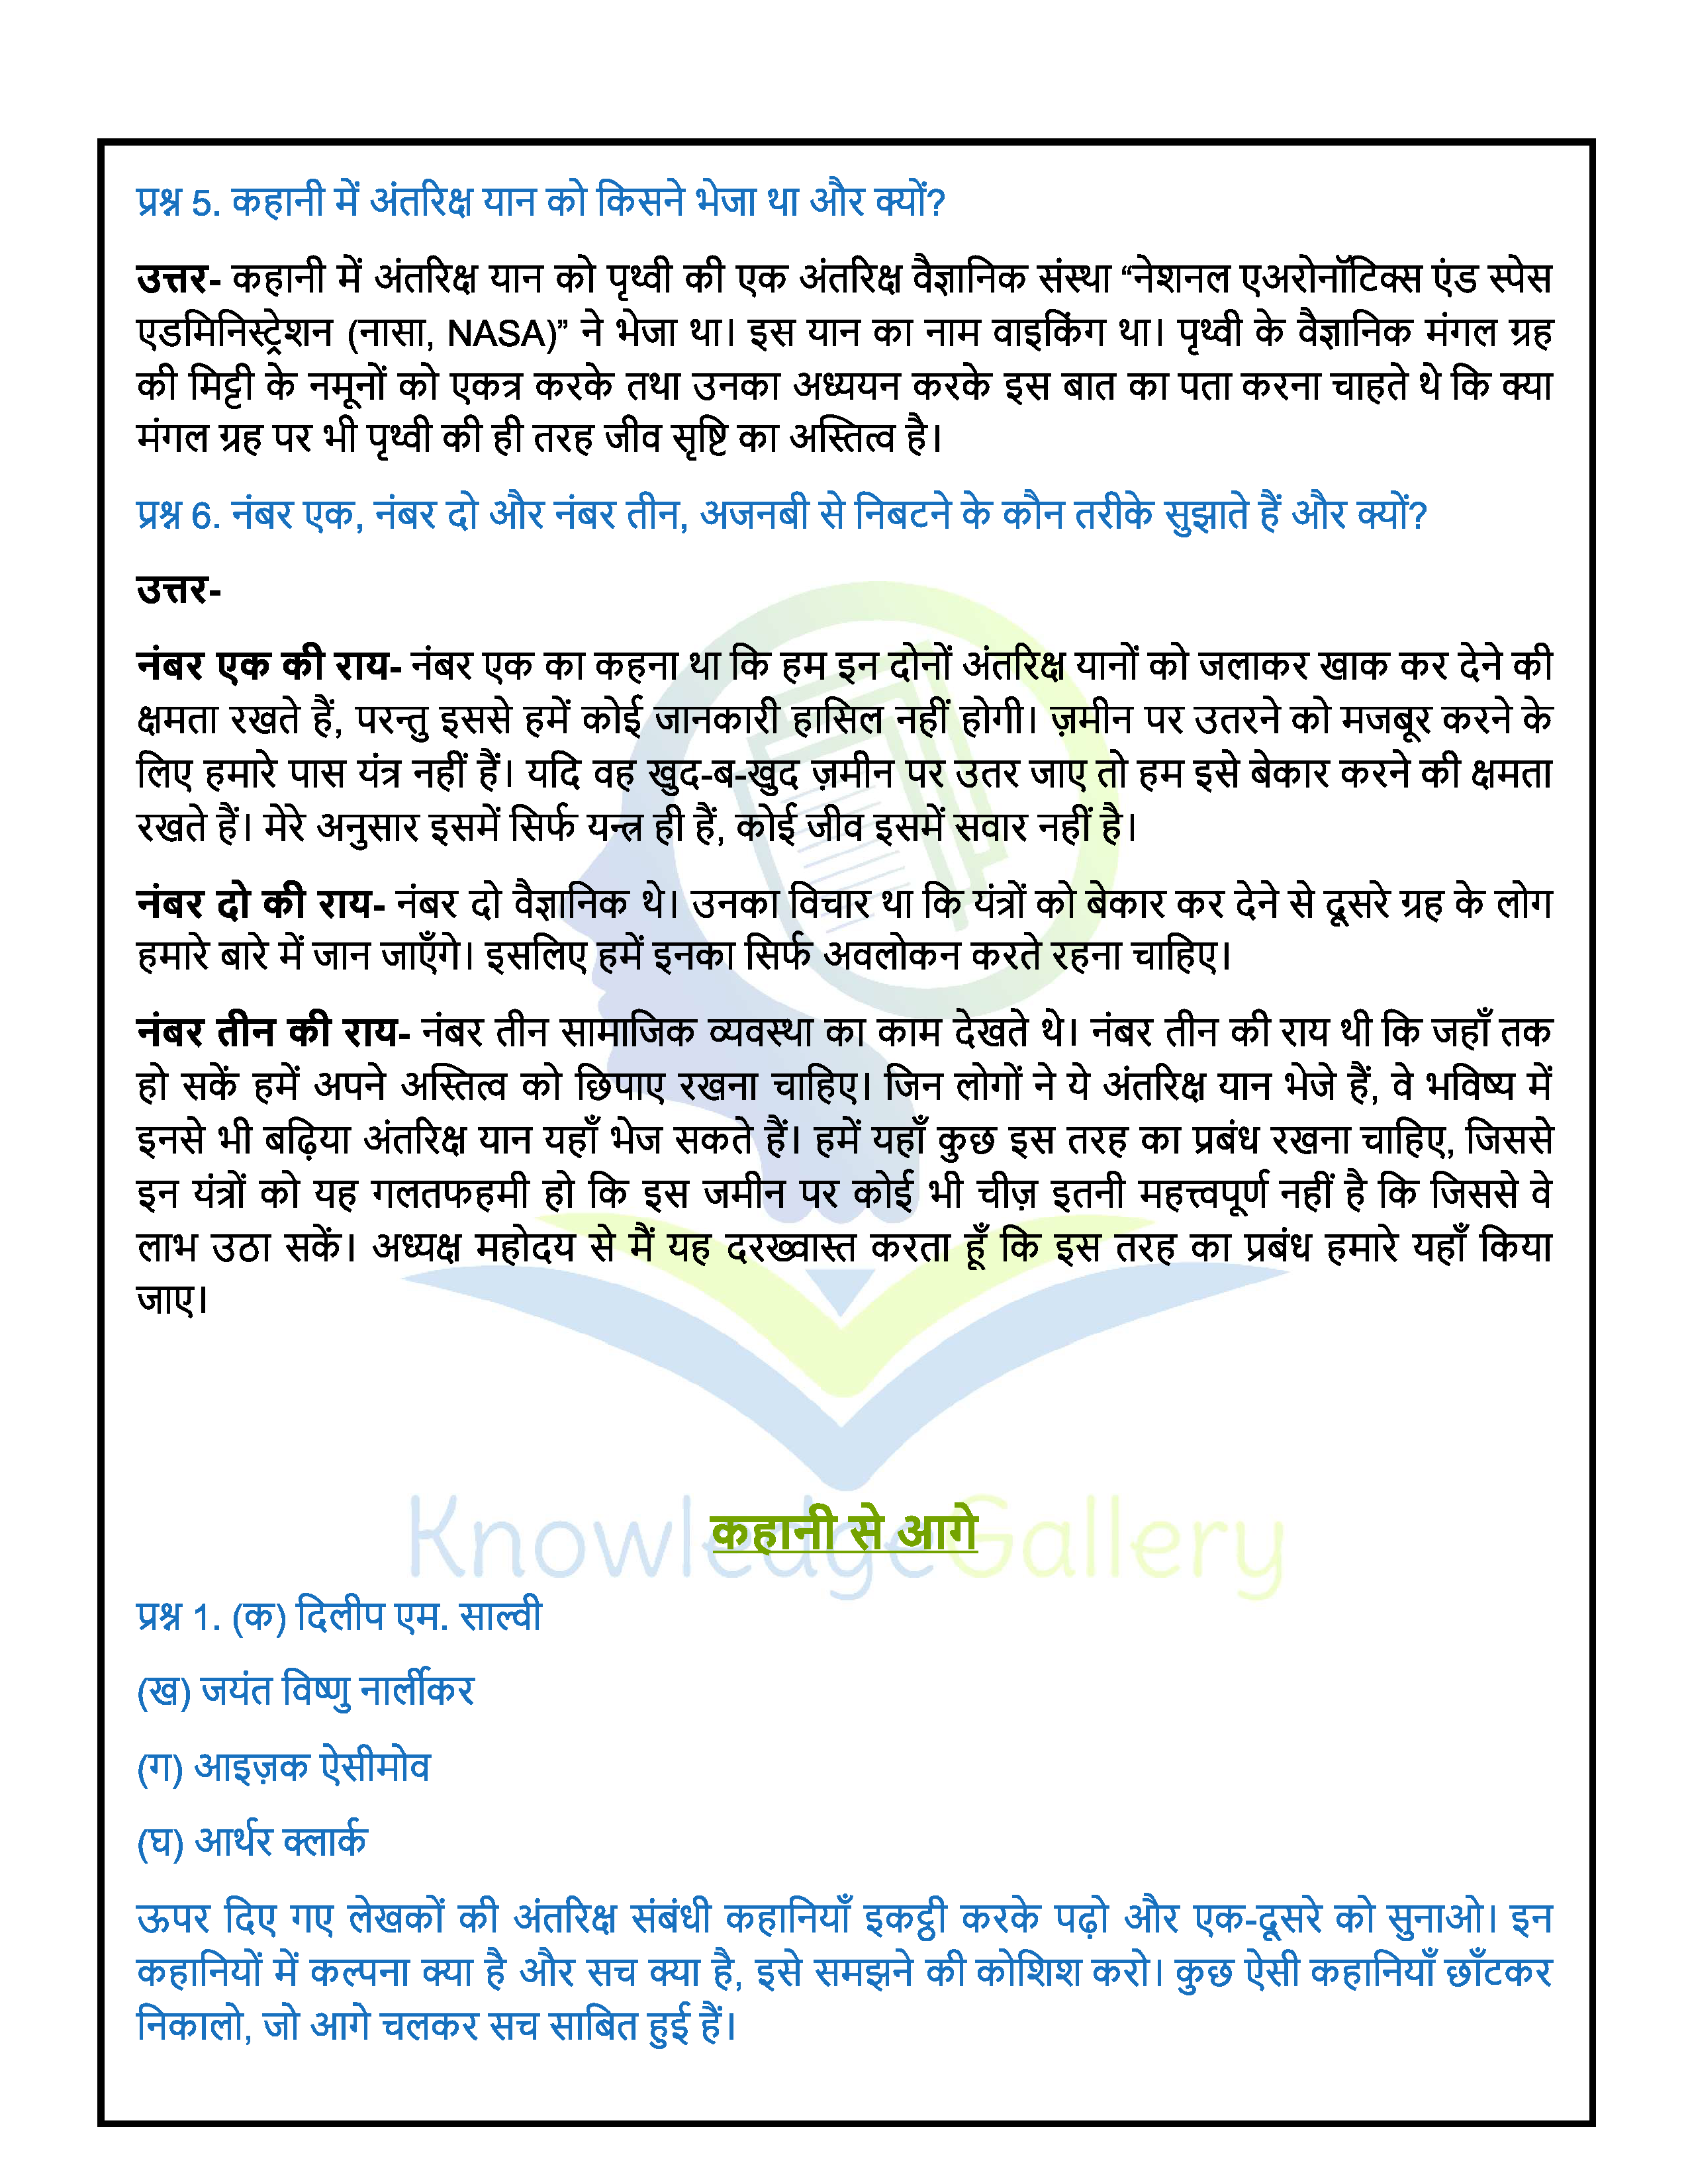 NCERT Solution For Class 6 Hindi Chapter 6 part 2